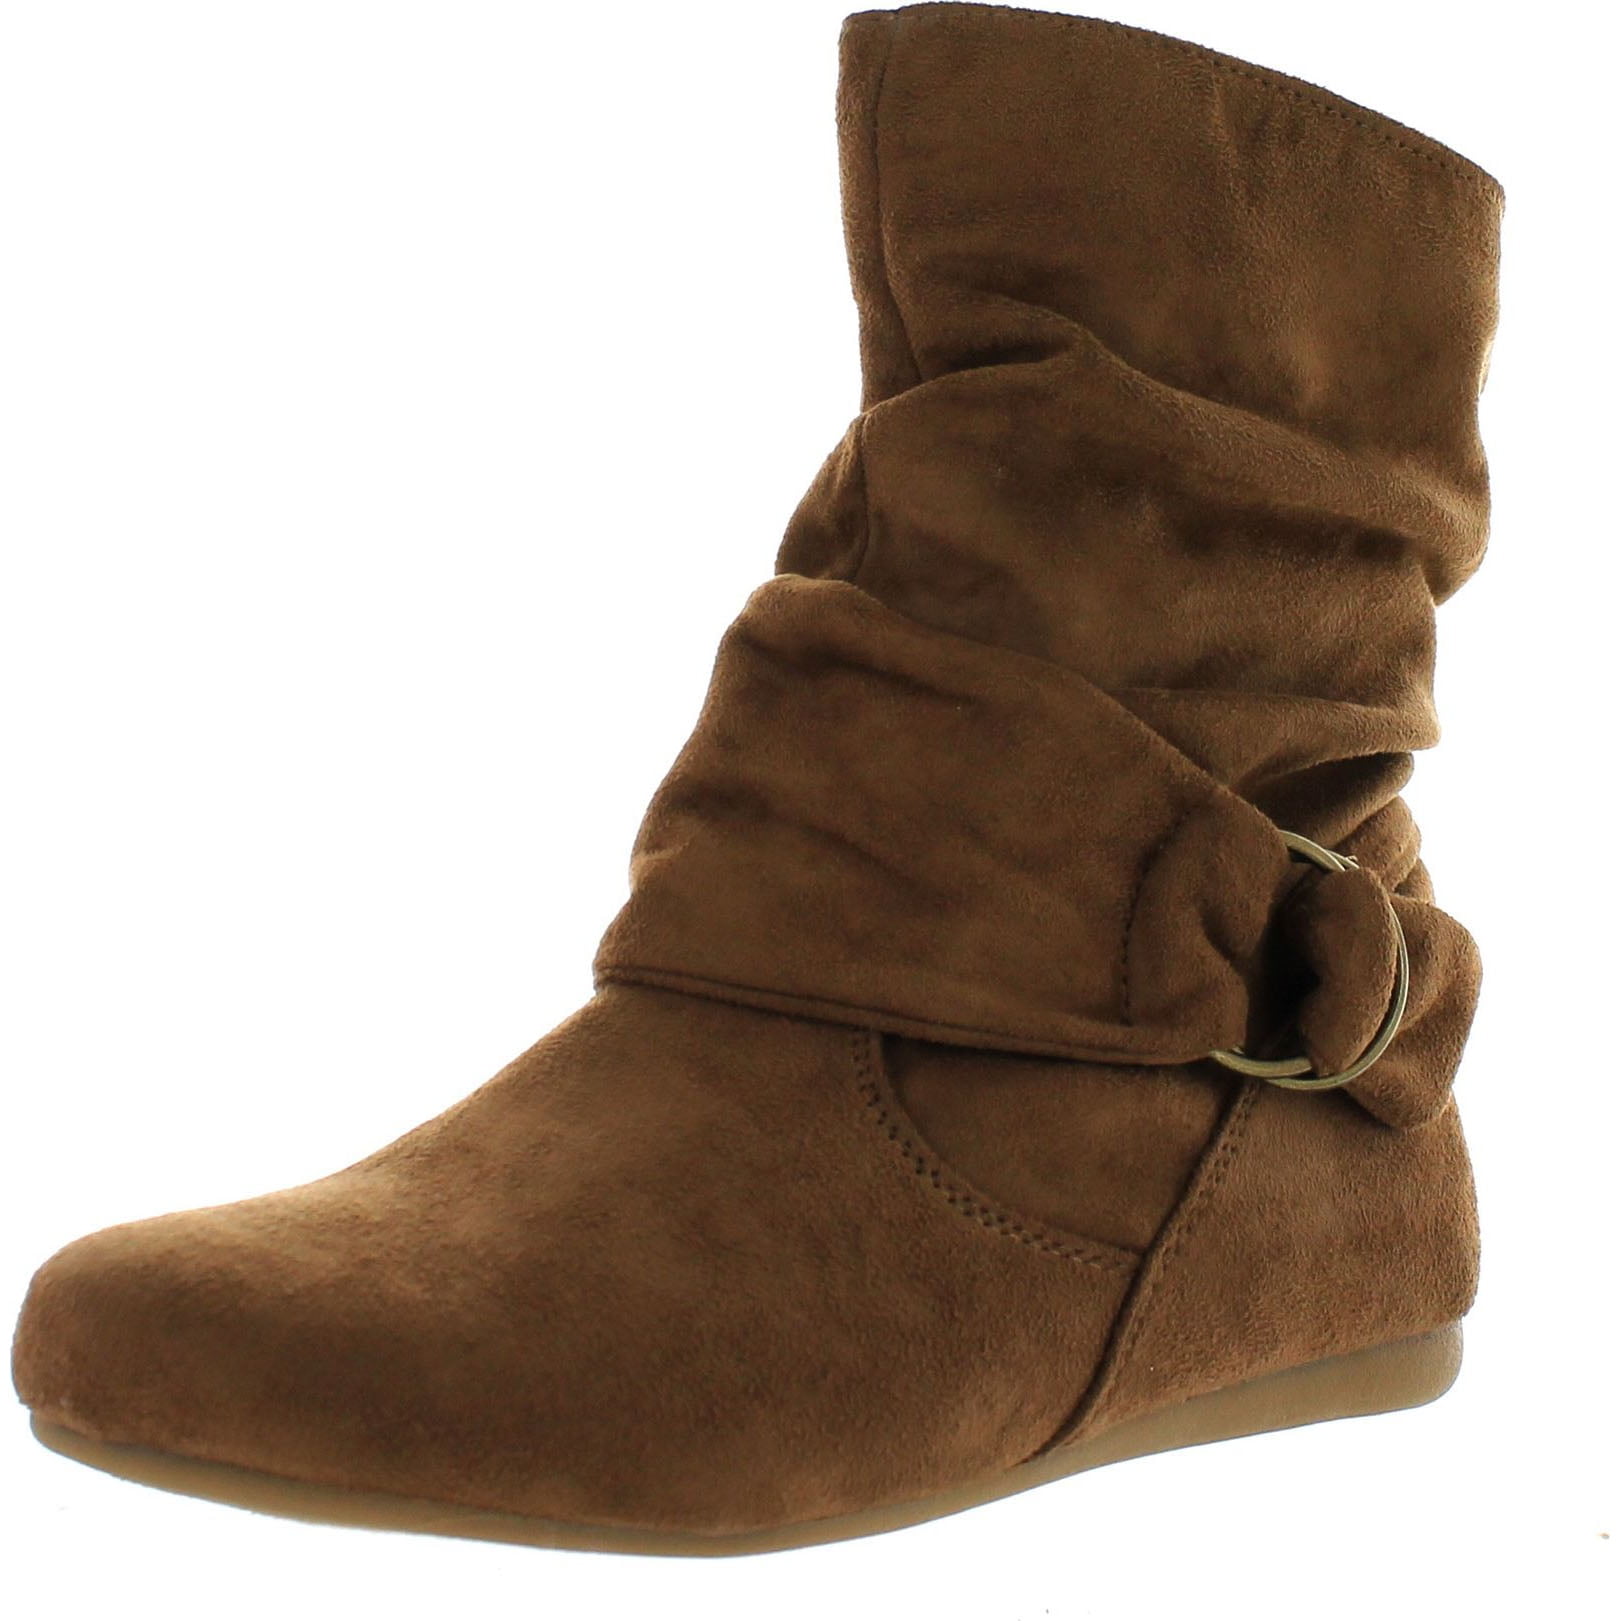 slouch ankle boots flat